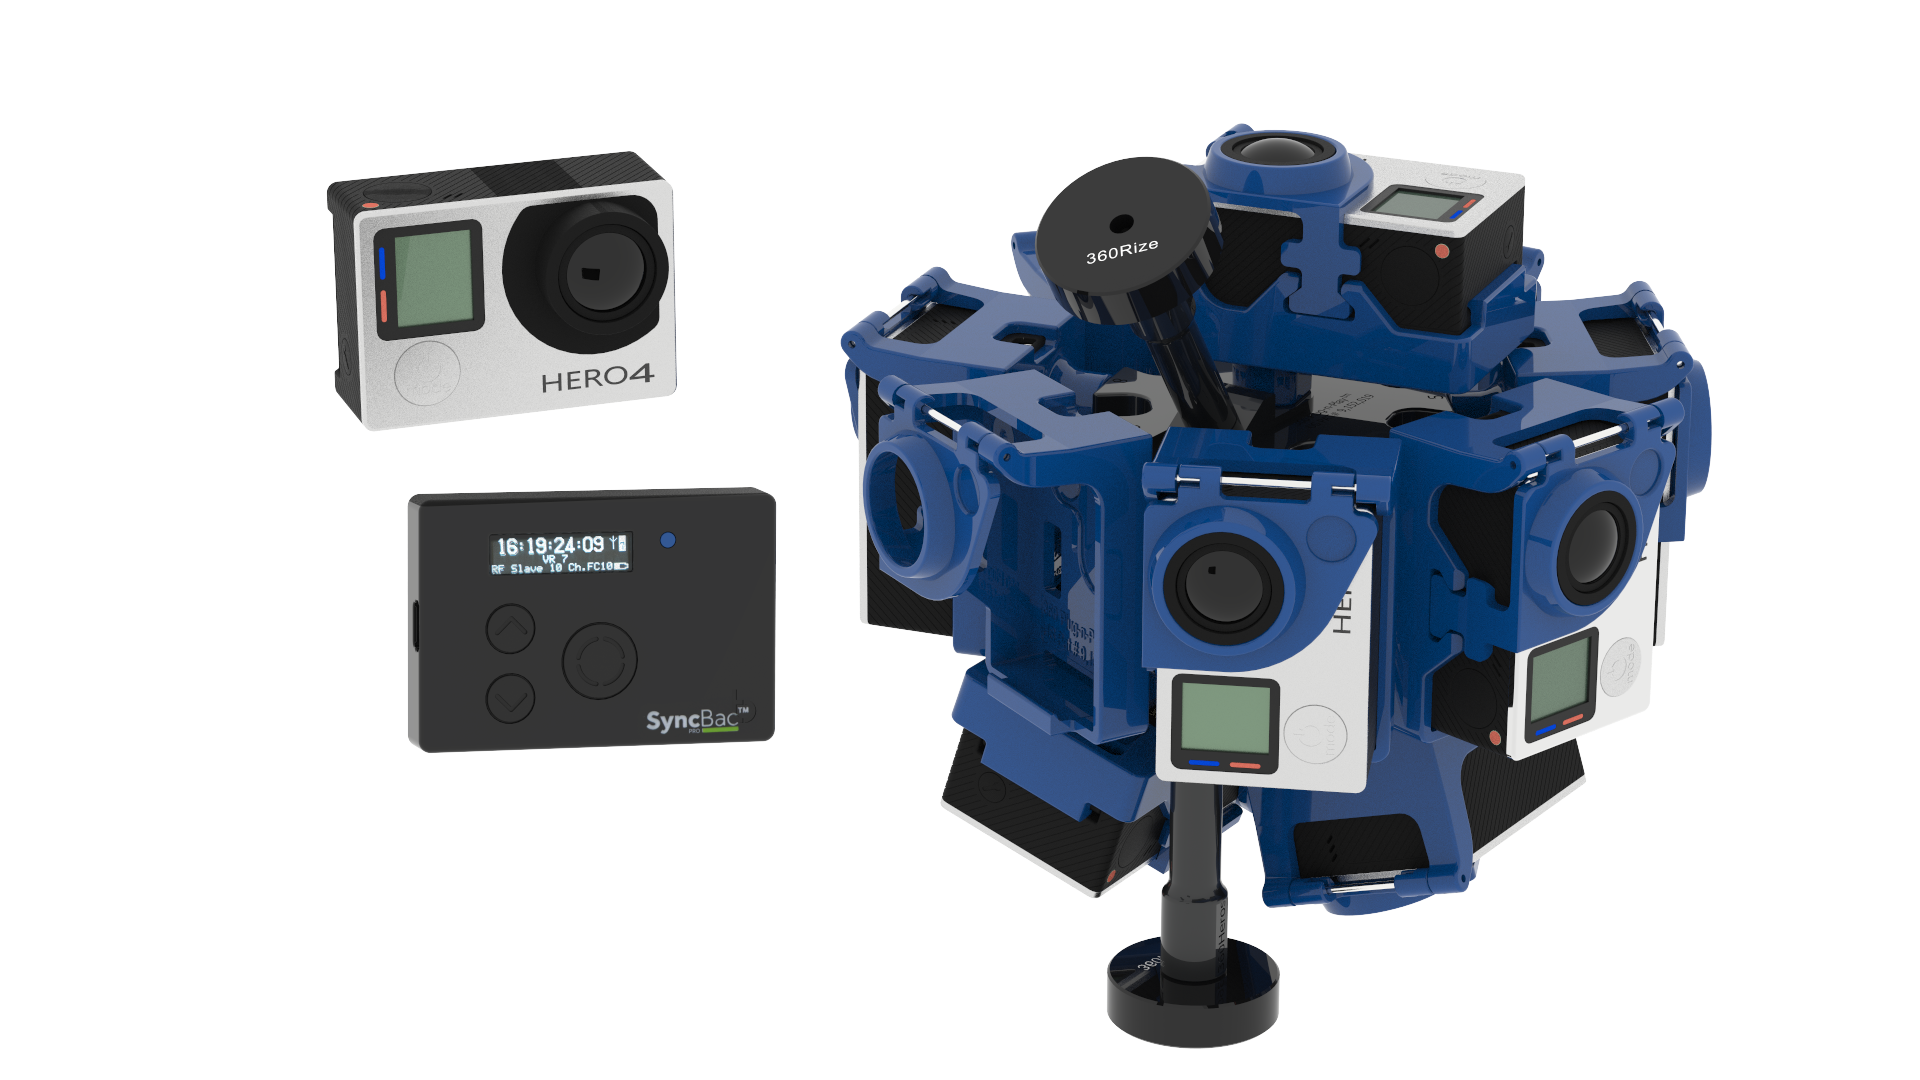 timecodesystems_360rize-vr-with-gopro-syncbac-pro